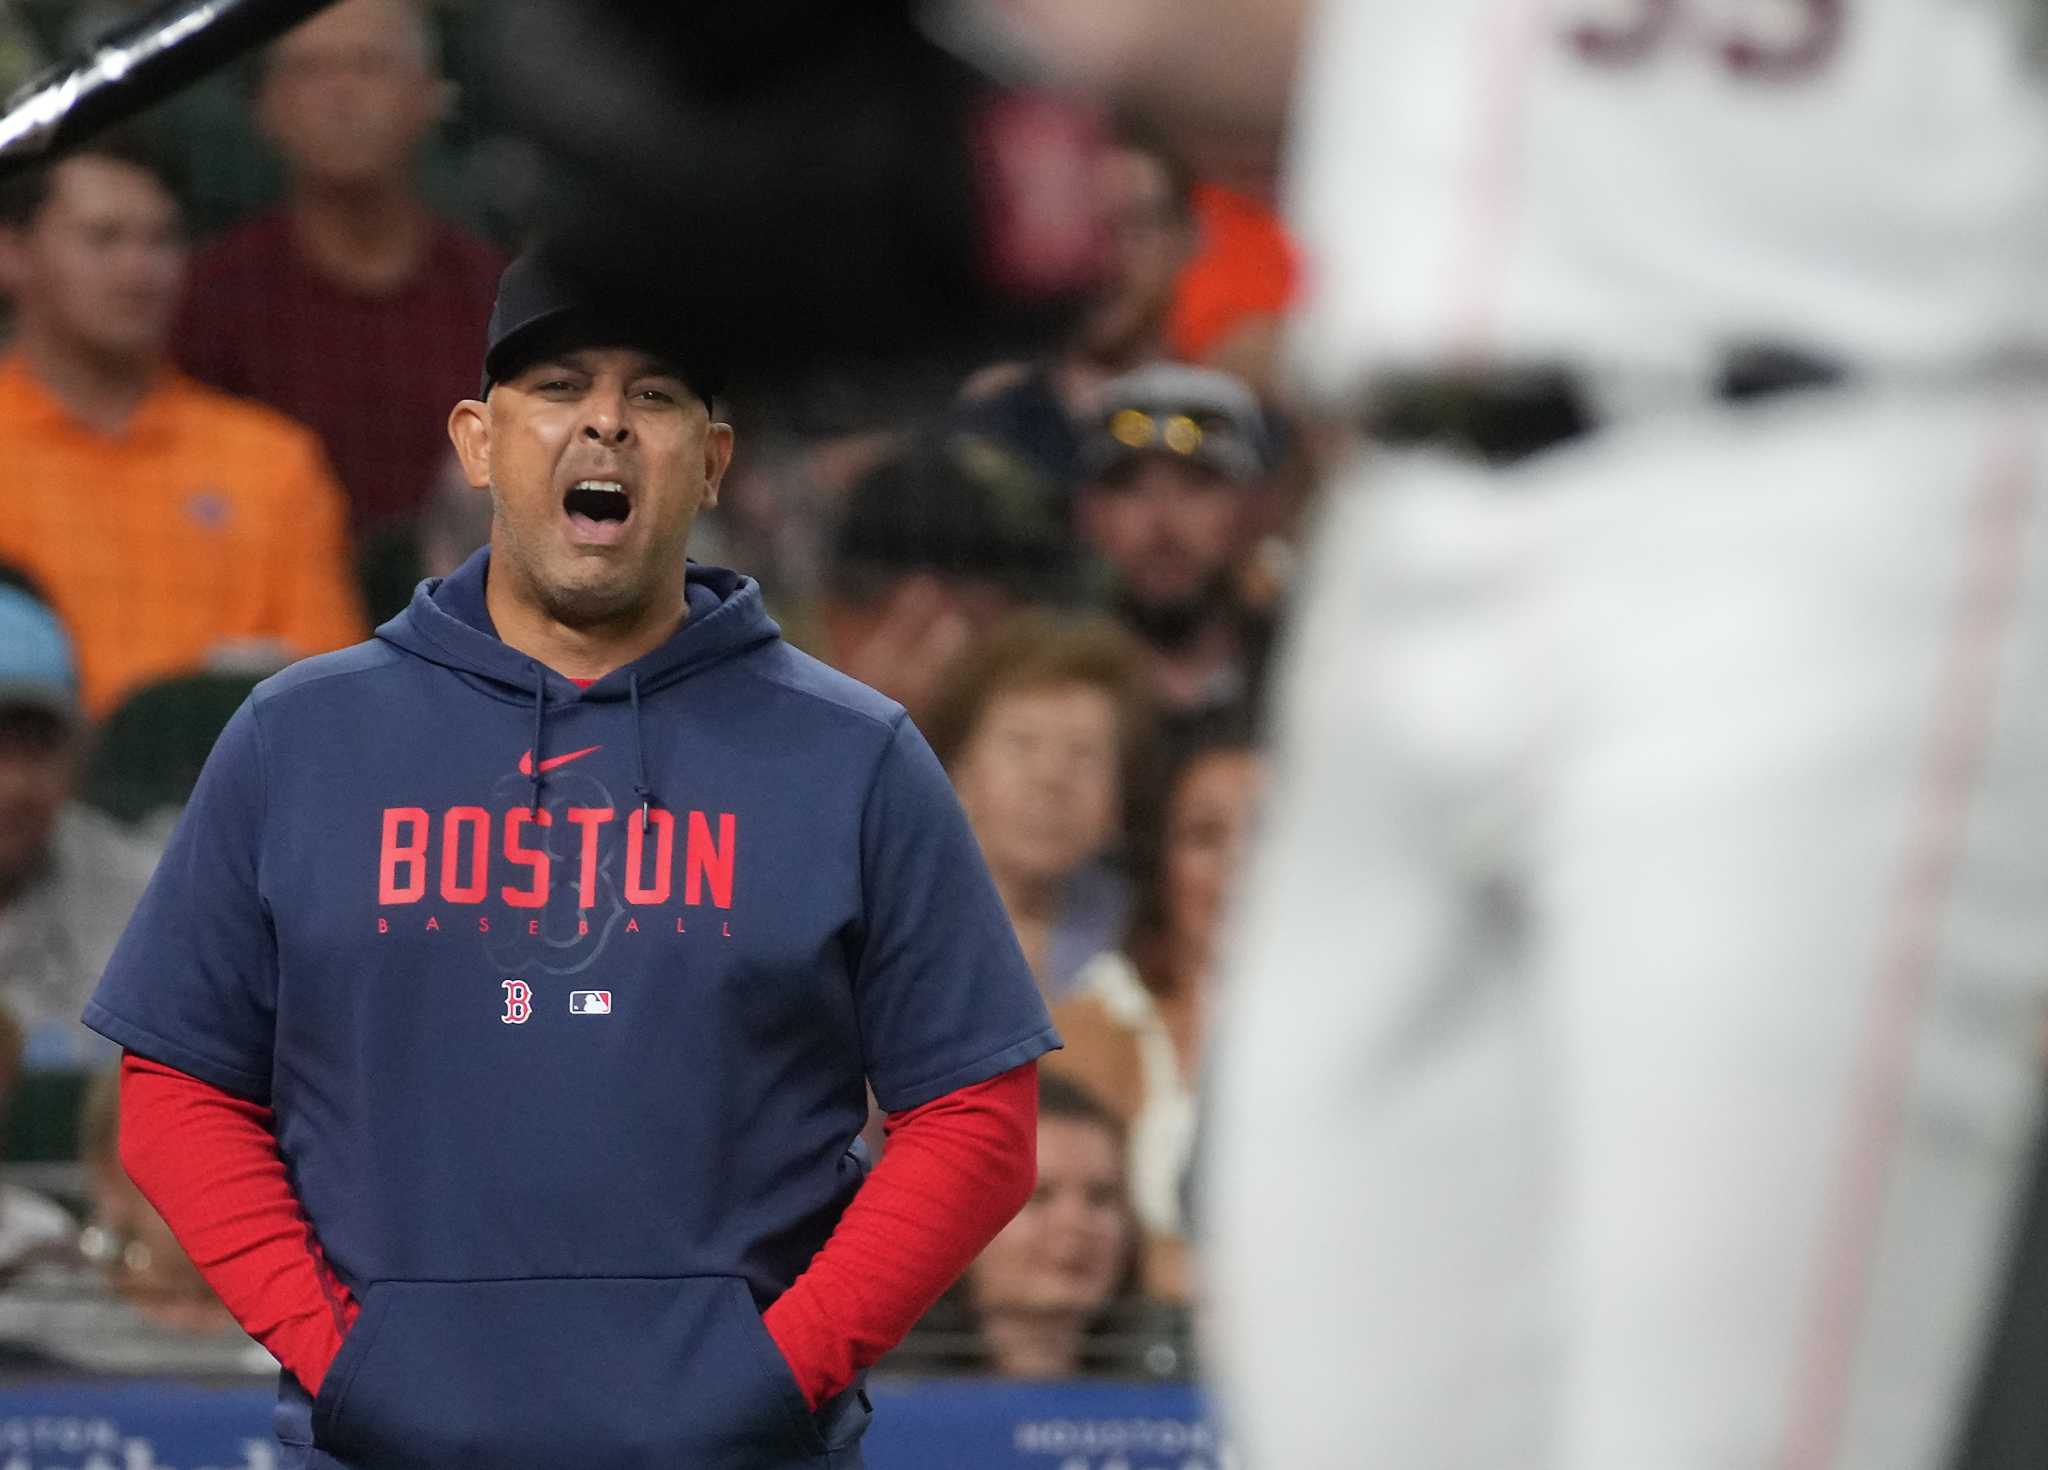 We just saw the greatest team in Boston Red Sox history, Boston Red Sox